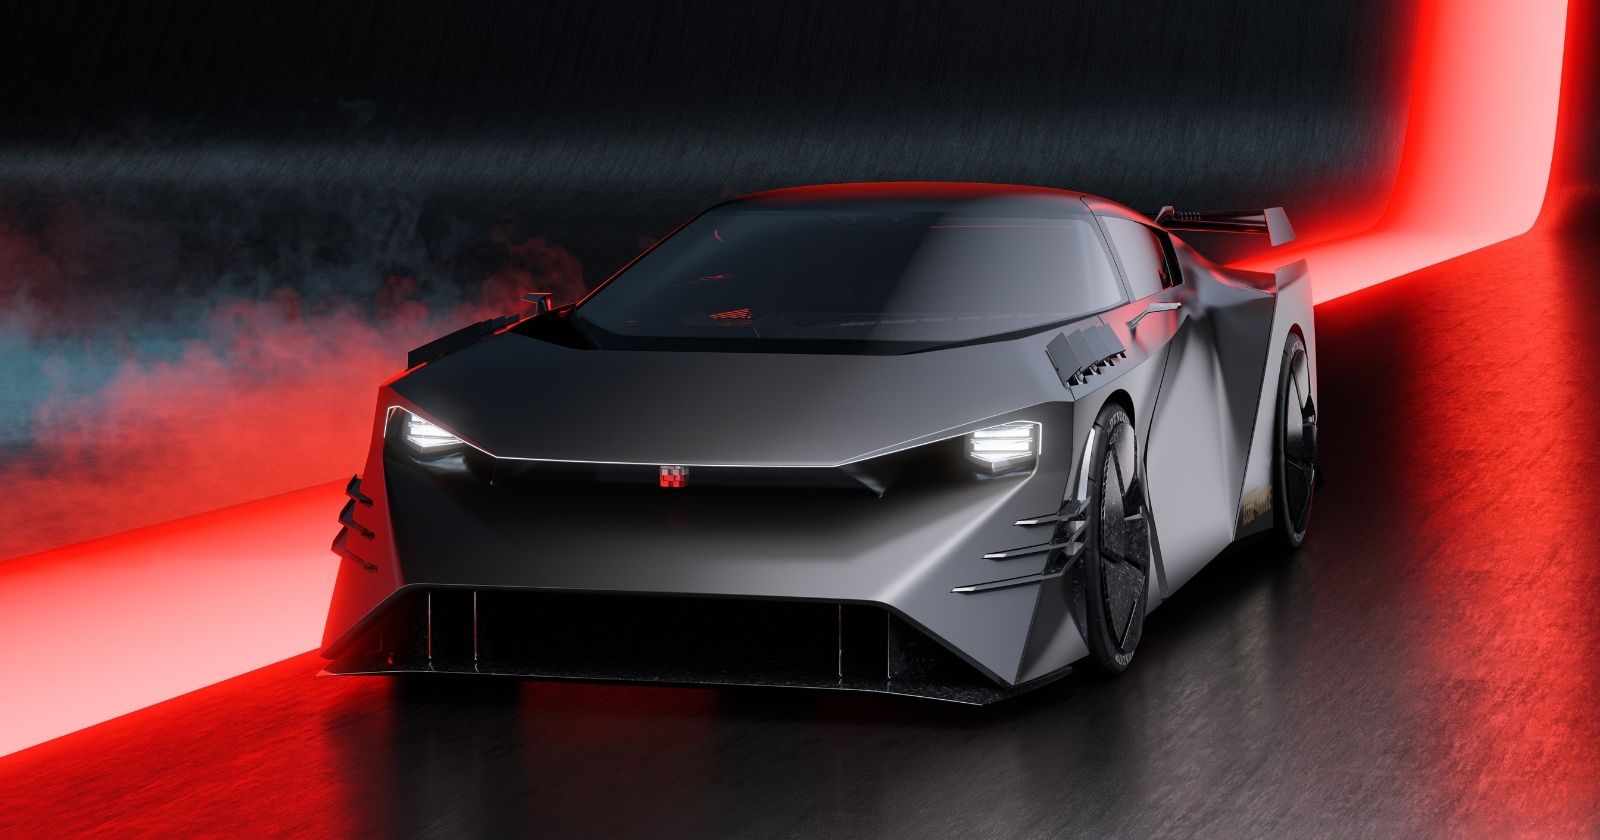 Nissan's New Hyper Force Sports Car Delivers 1,341 Horsepower